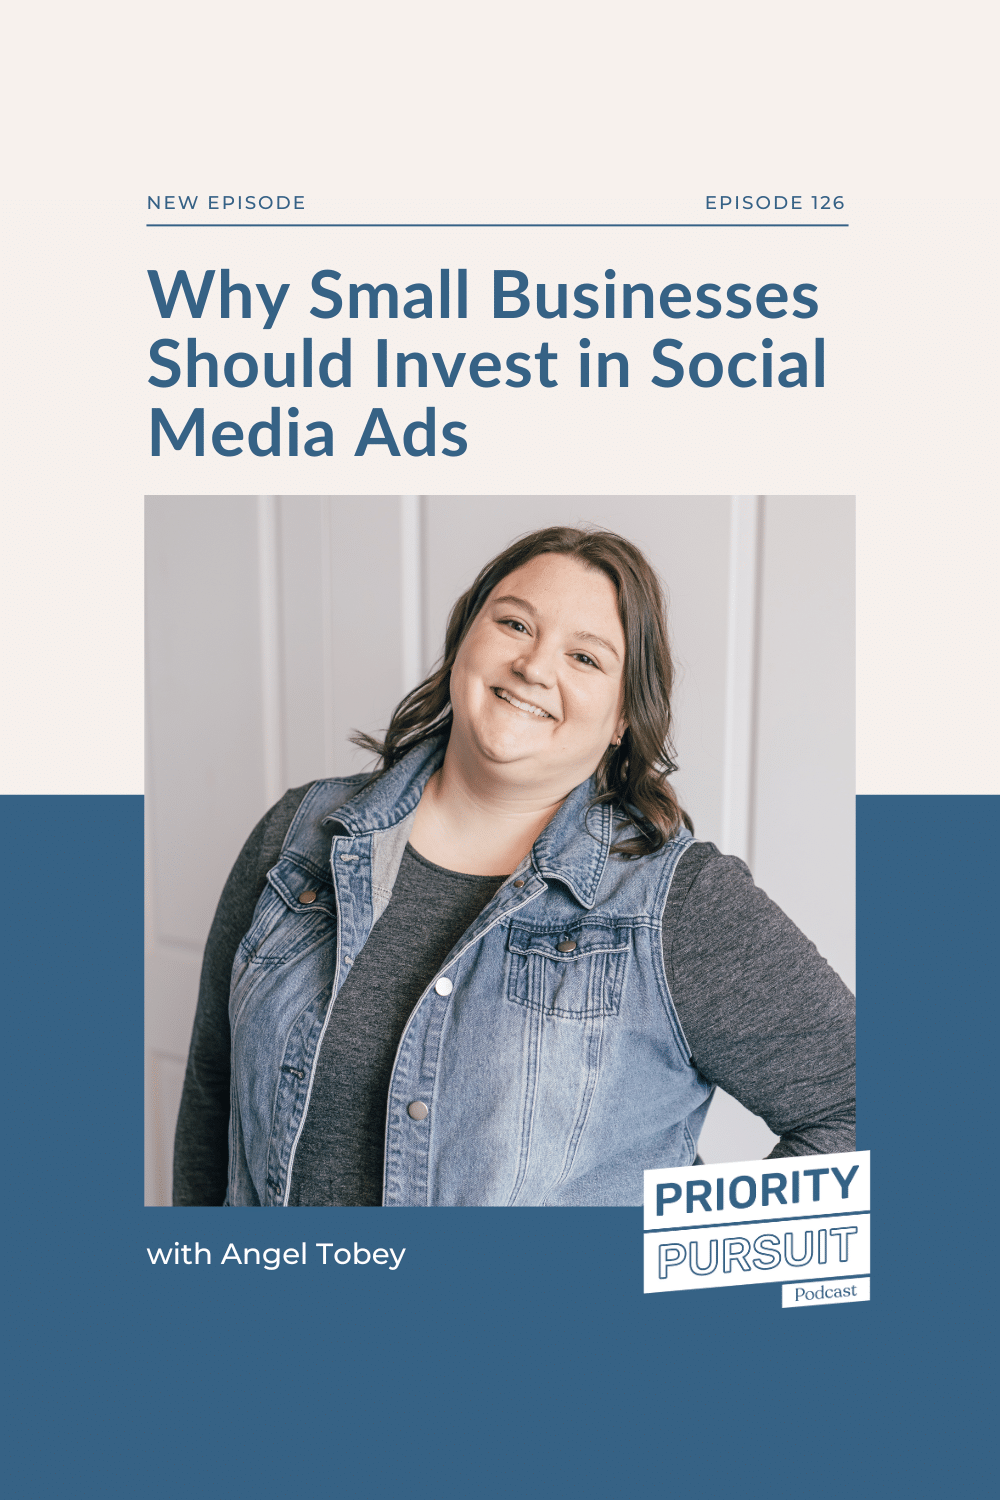 In this week’s episode of “Priority Pursuit,” Angel Tobey explains why small businesses should invest in social media ads and provides her tips and tricks.